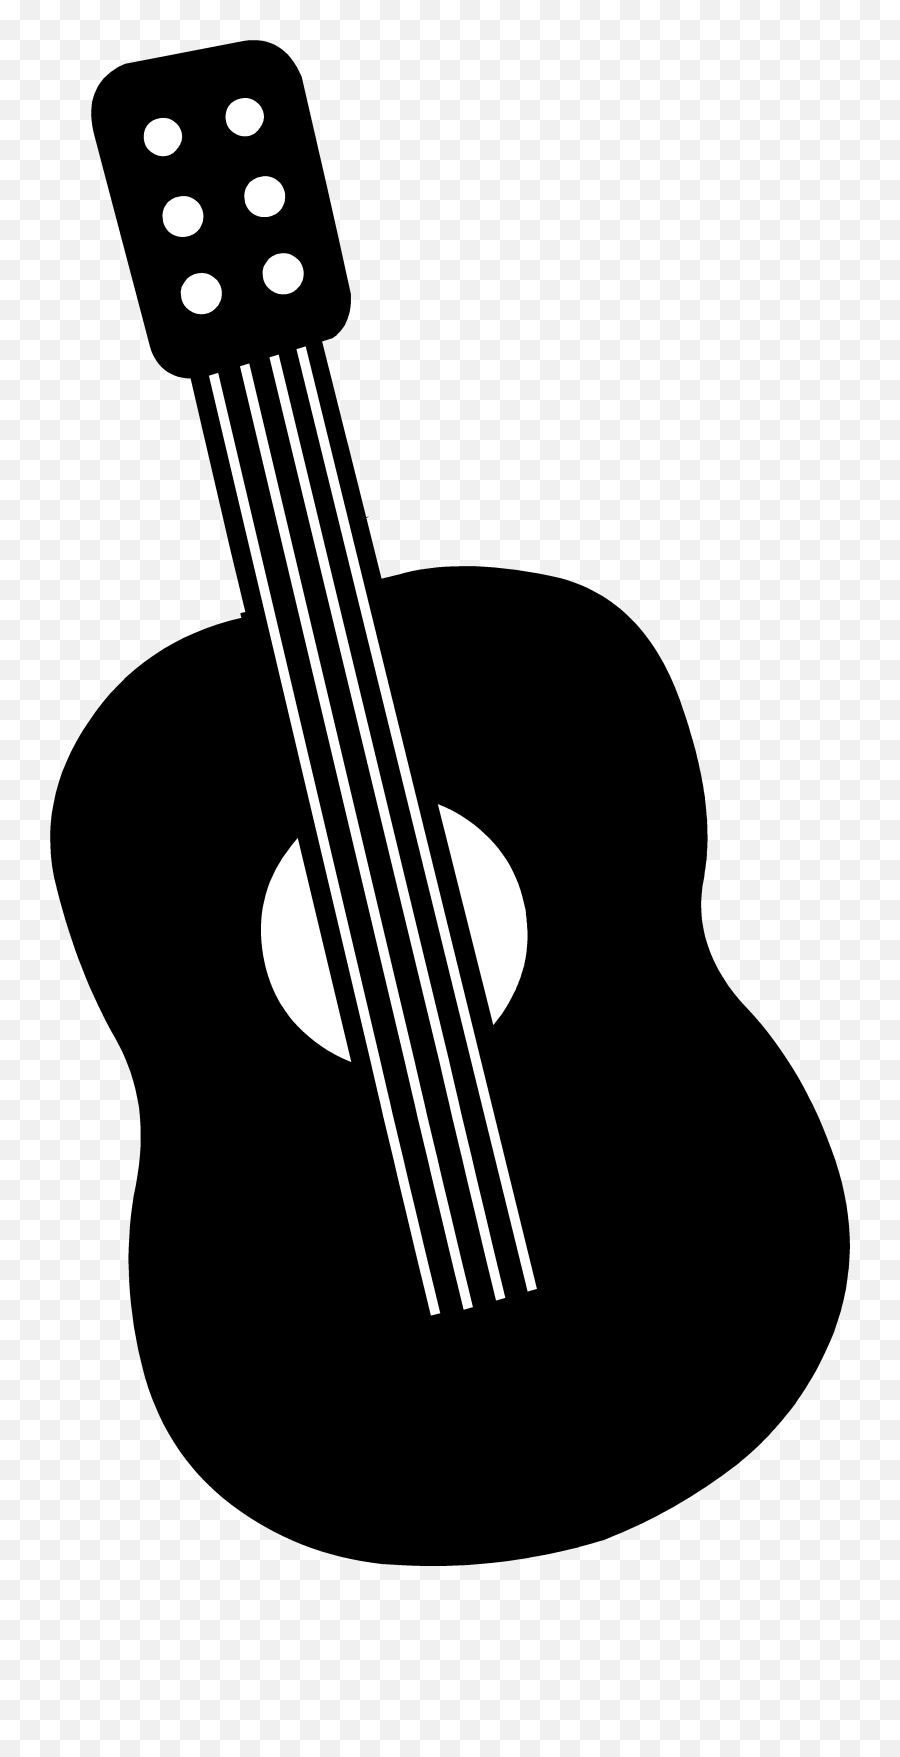 Free Silhouette Guitar Download Free Clip Art Free Clip - Small Guitar Clip Art Emoji,Guitar Emoticon